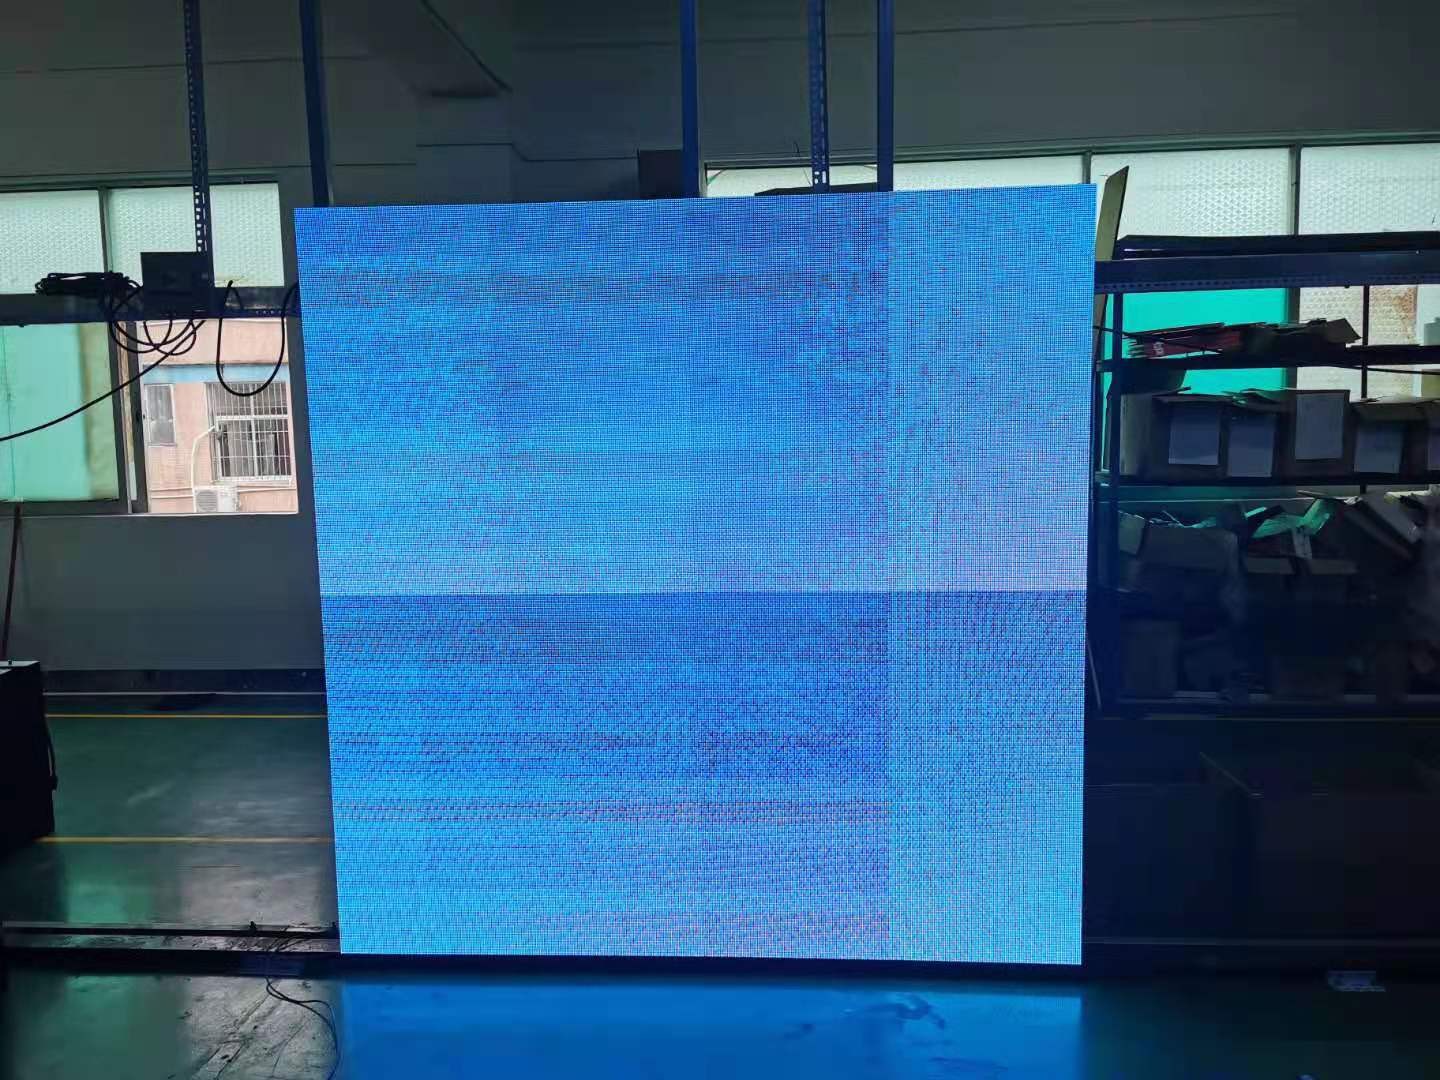 Waterproof High End Led Screen For Activity Manufacturers, Waterproof High End Led Screen For Activity Factory, Supply Waterproof High End Led Screen For Activity